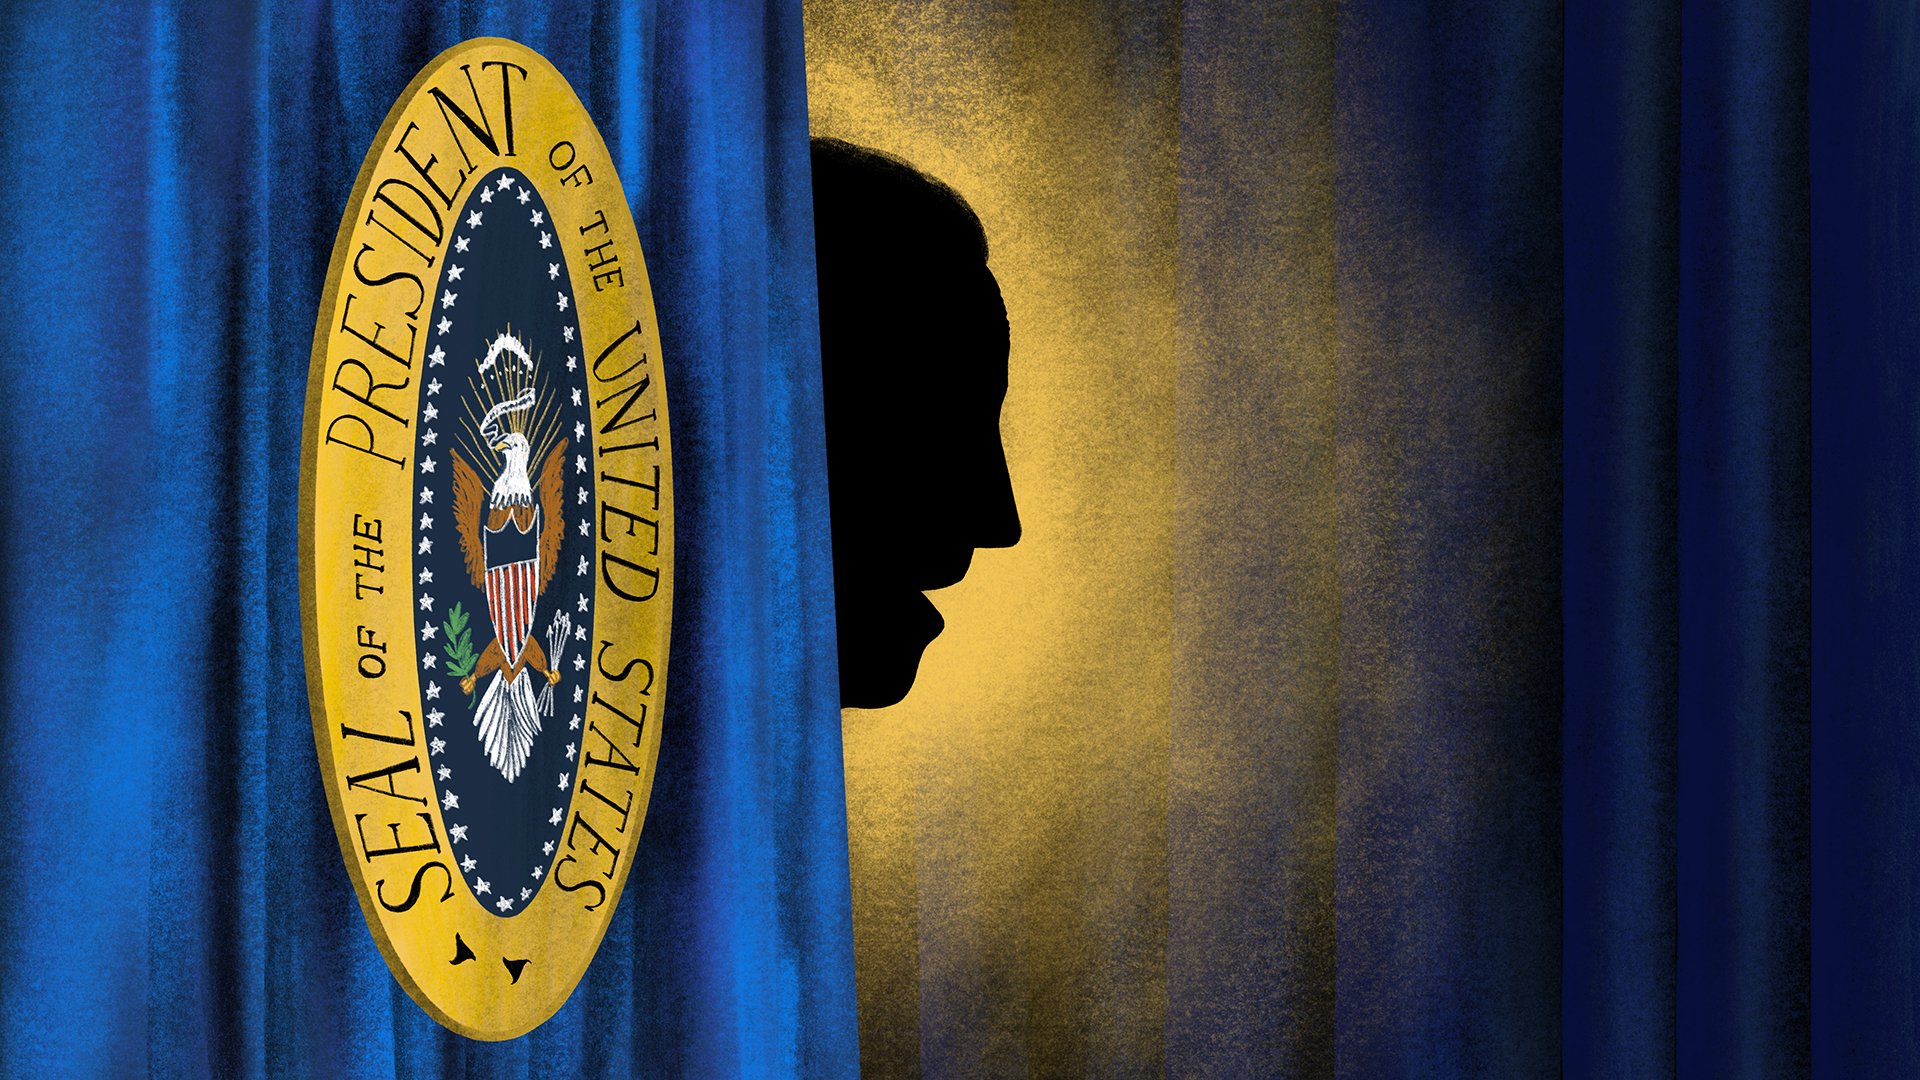 An illustration shows a tall blue curtain with the US presidential seal in gold on it. President Joe Biden’s silhouetted profile is peeking out from behind the curtain, as if waiting to be called onstage.